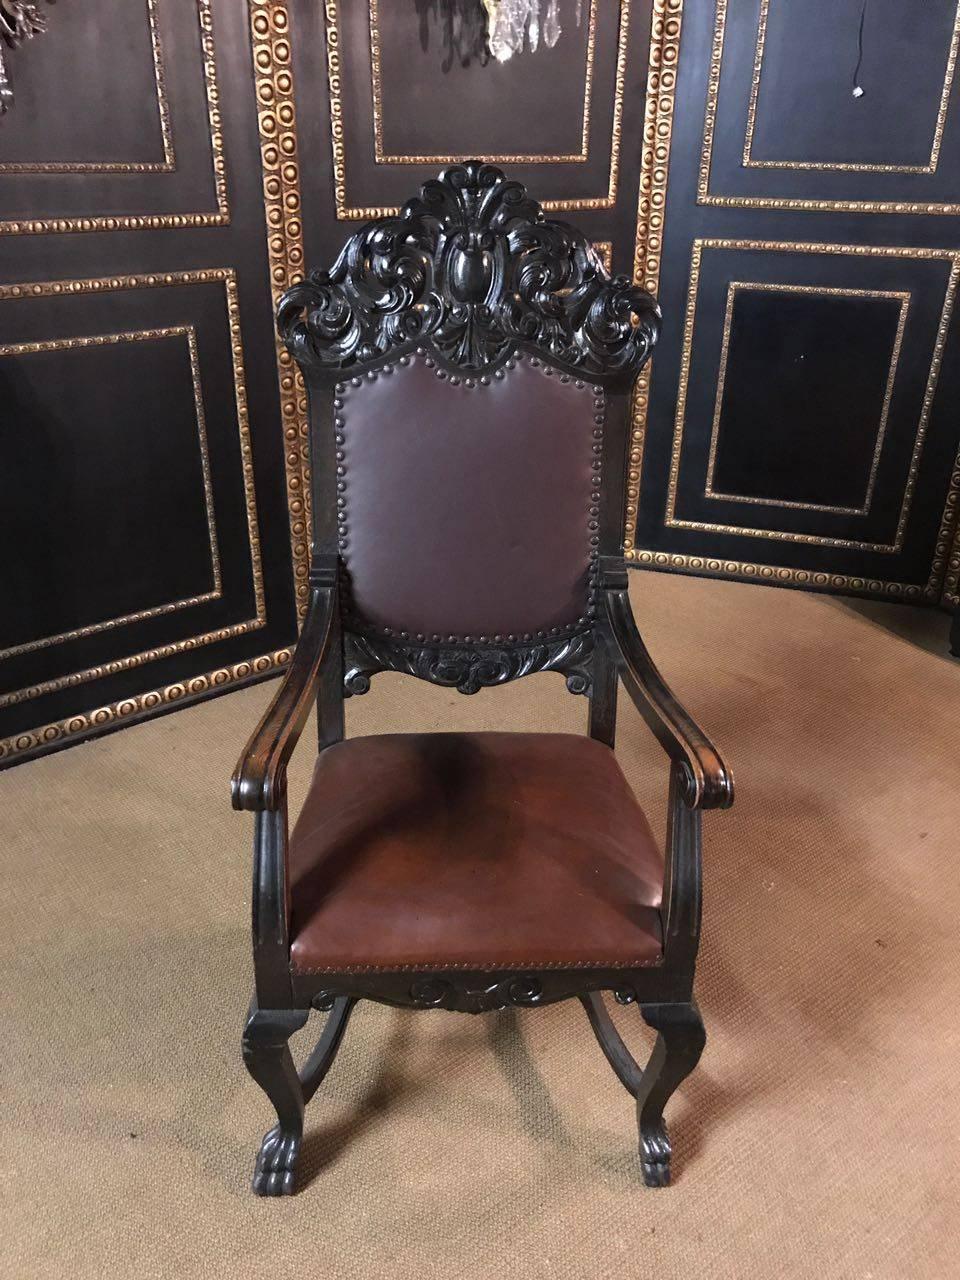 Solid oak. On four curved carved legs. Complete with rich carvings, flanked by two armrests. High backrest crowned by plastic carvings. The seat and back are leather covered in Classic design.

A good historical condition with a beautiful warm